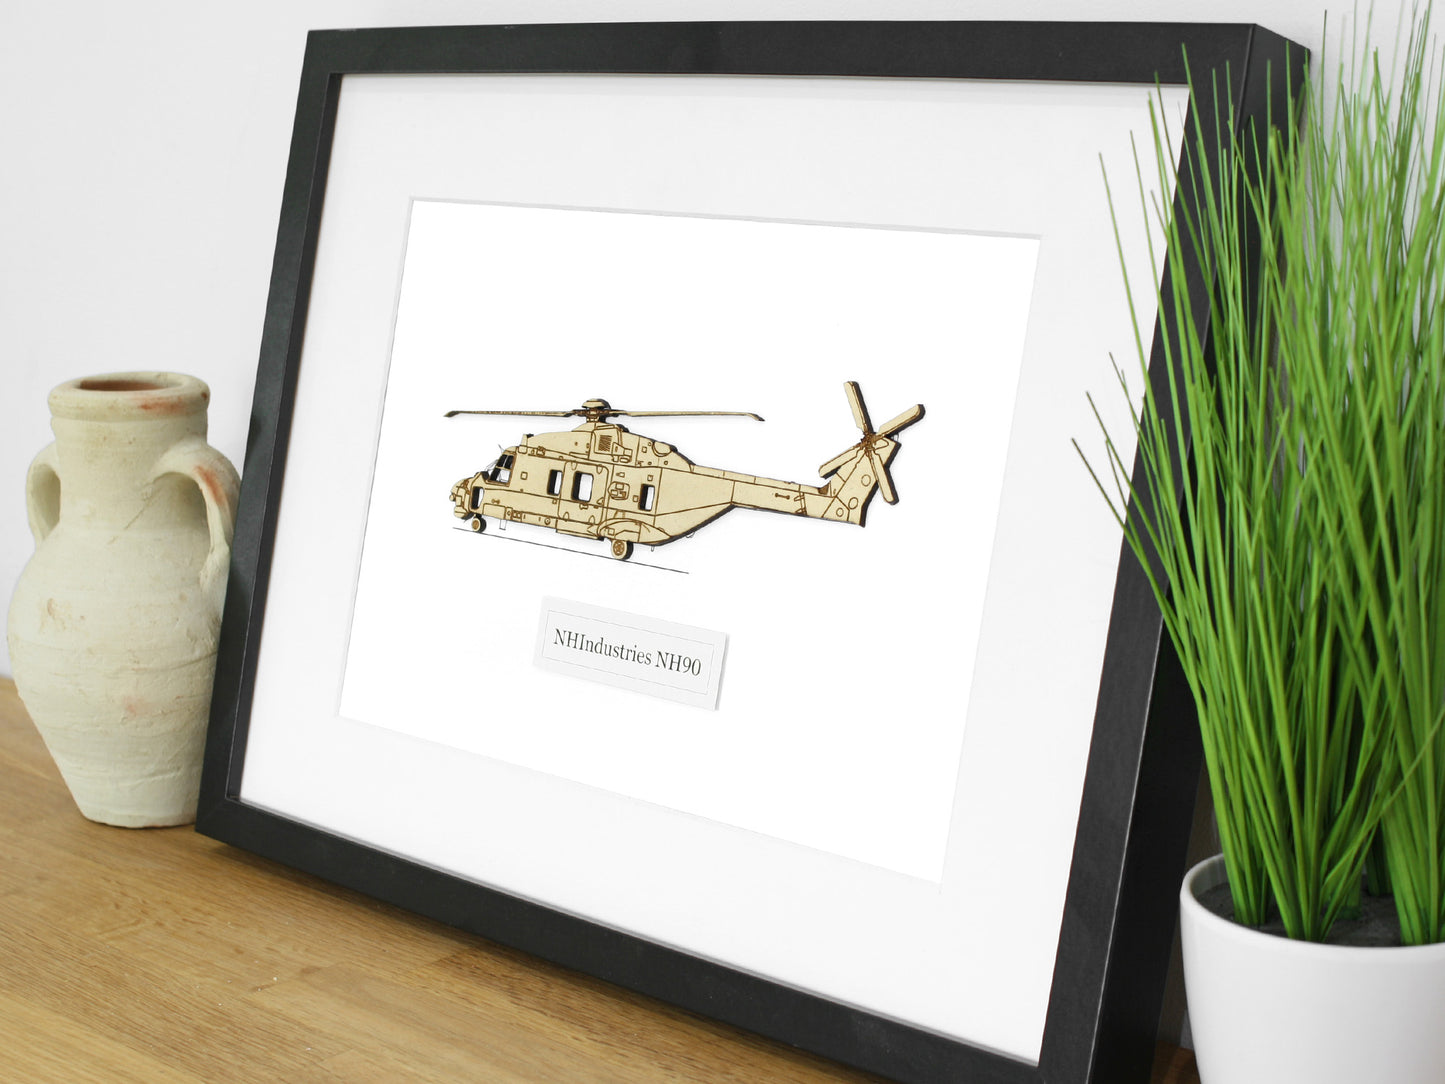 NHIndustries NH90 helicopter gifts